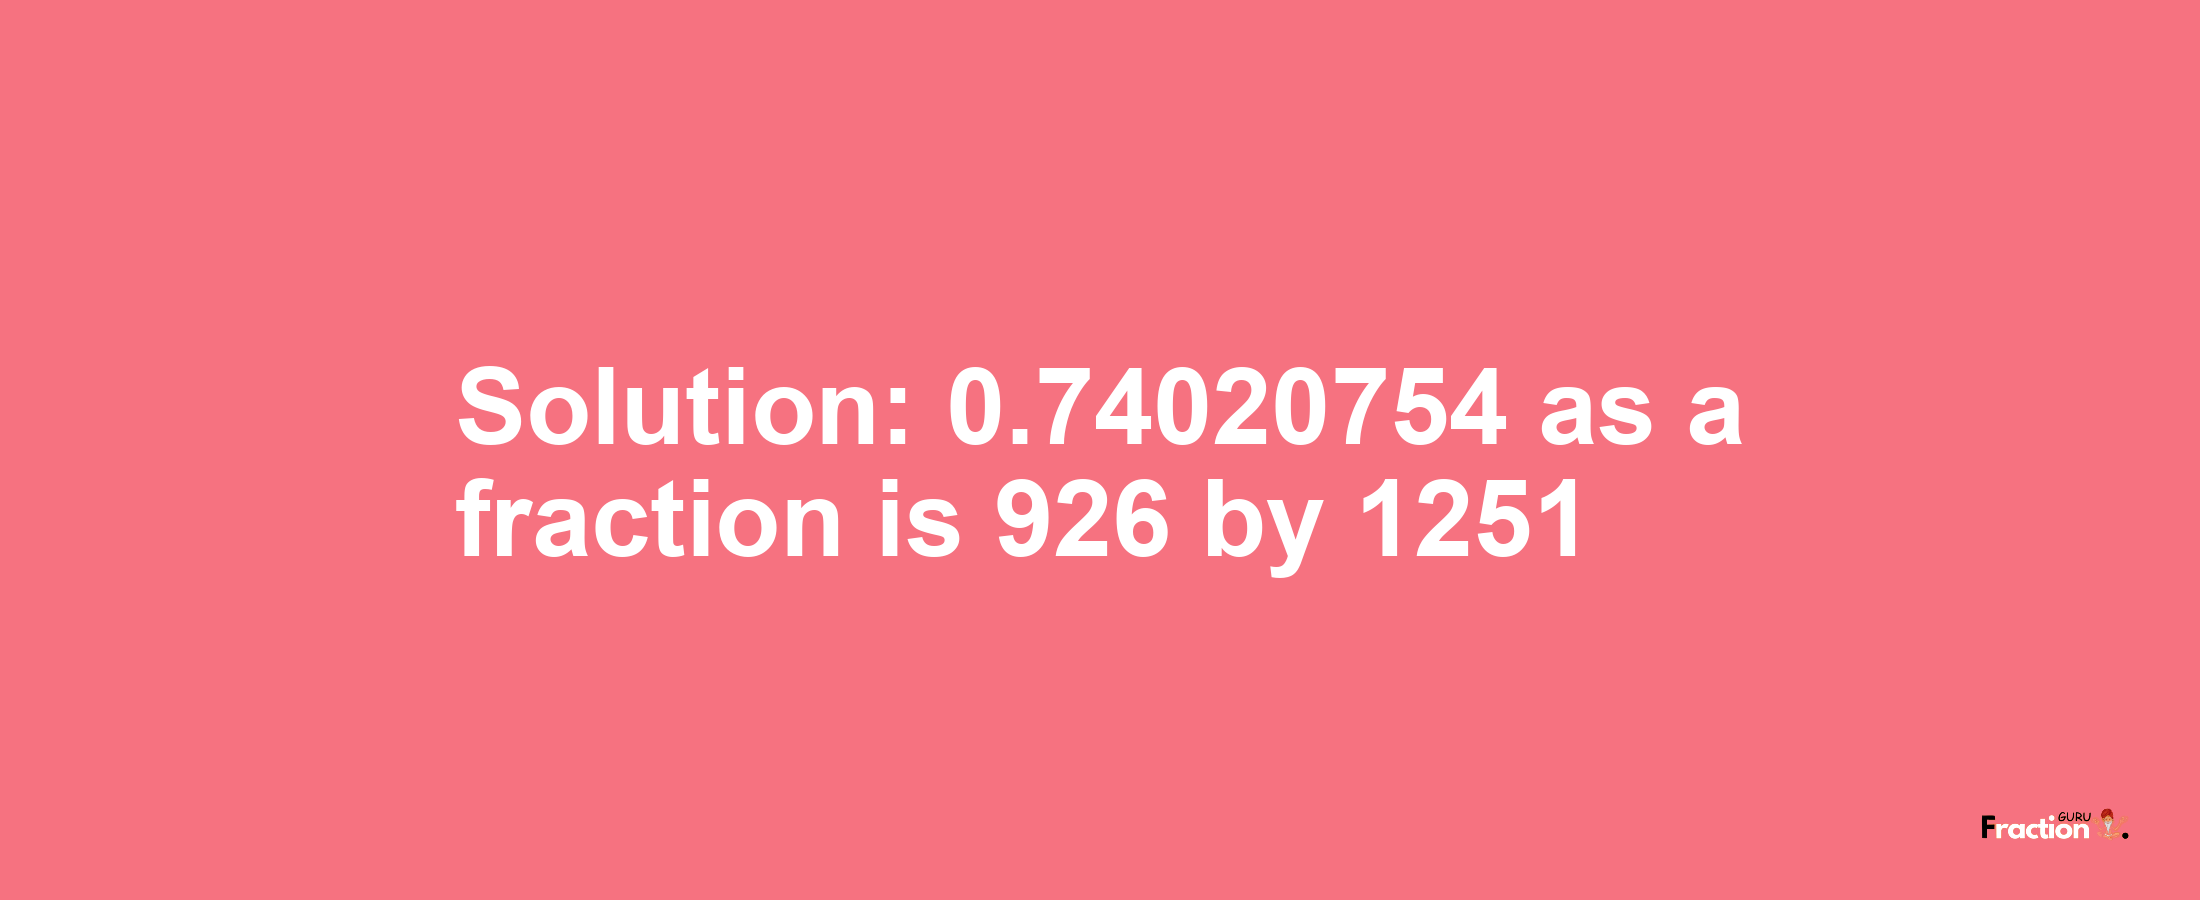 Solution:0.74020754 as a fraction is 926/1251